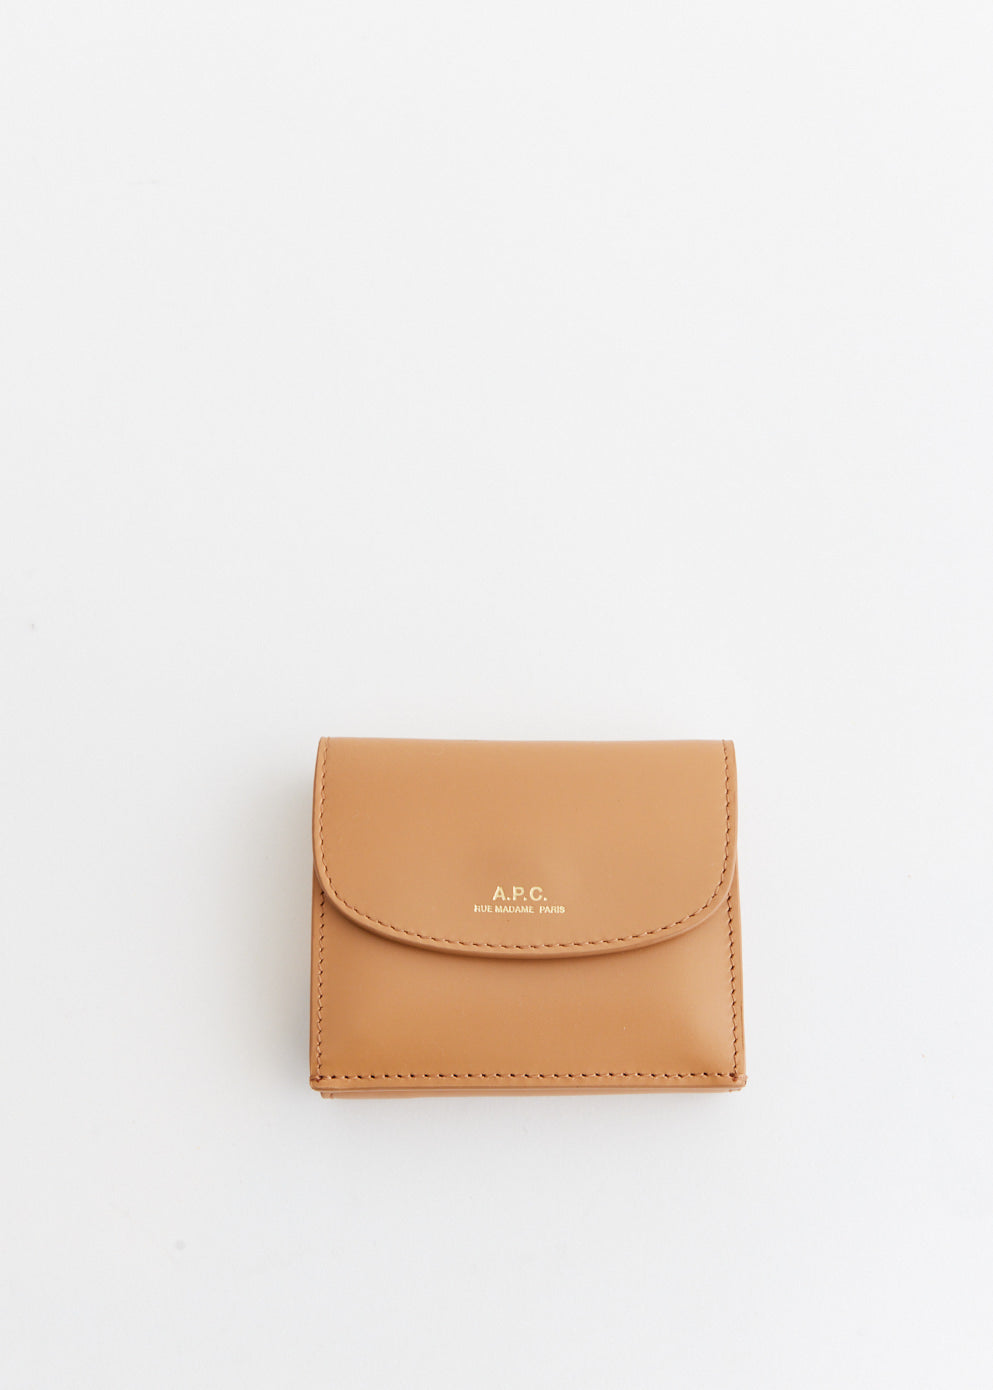 Geneve Trifold Wallet